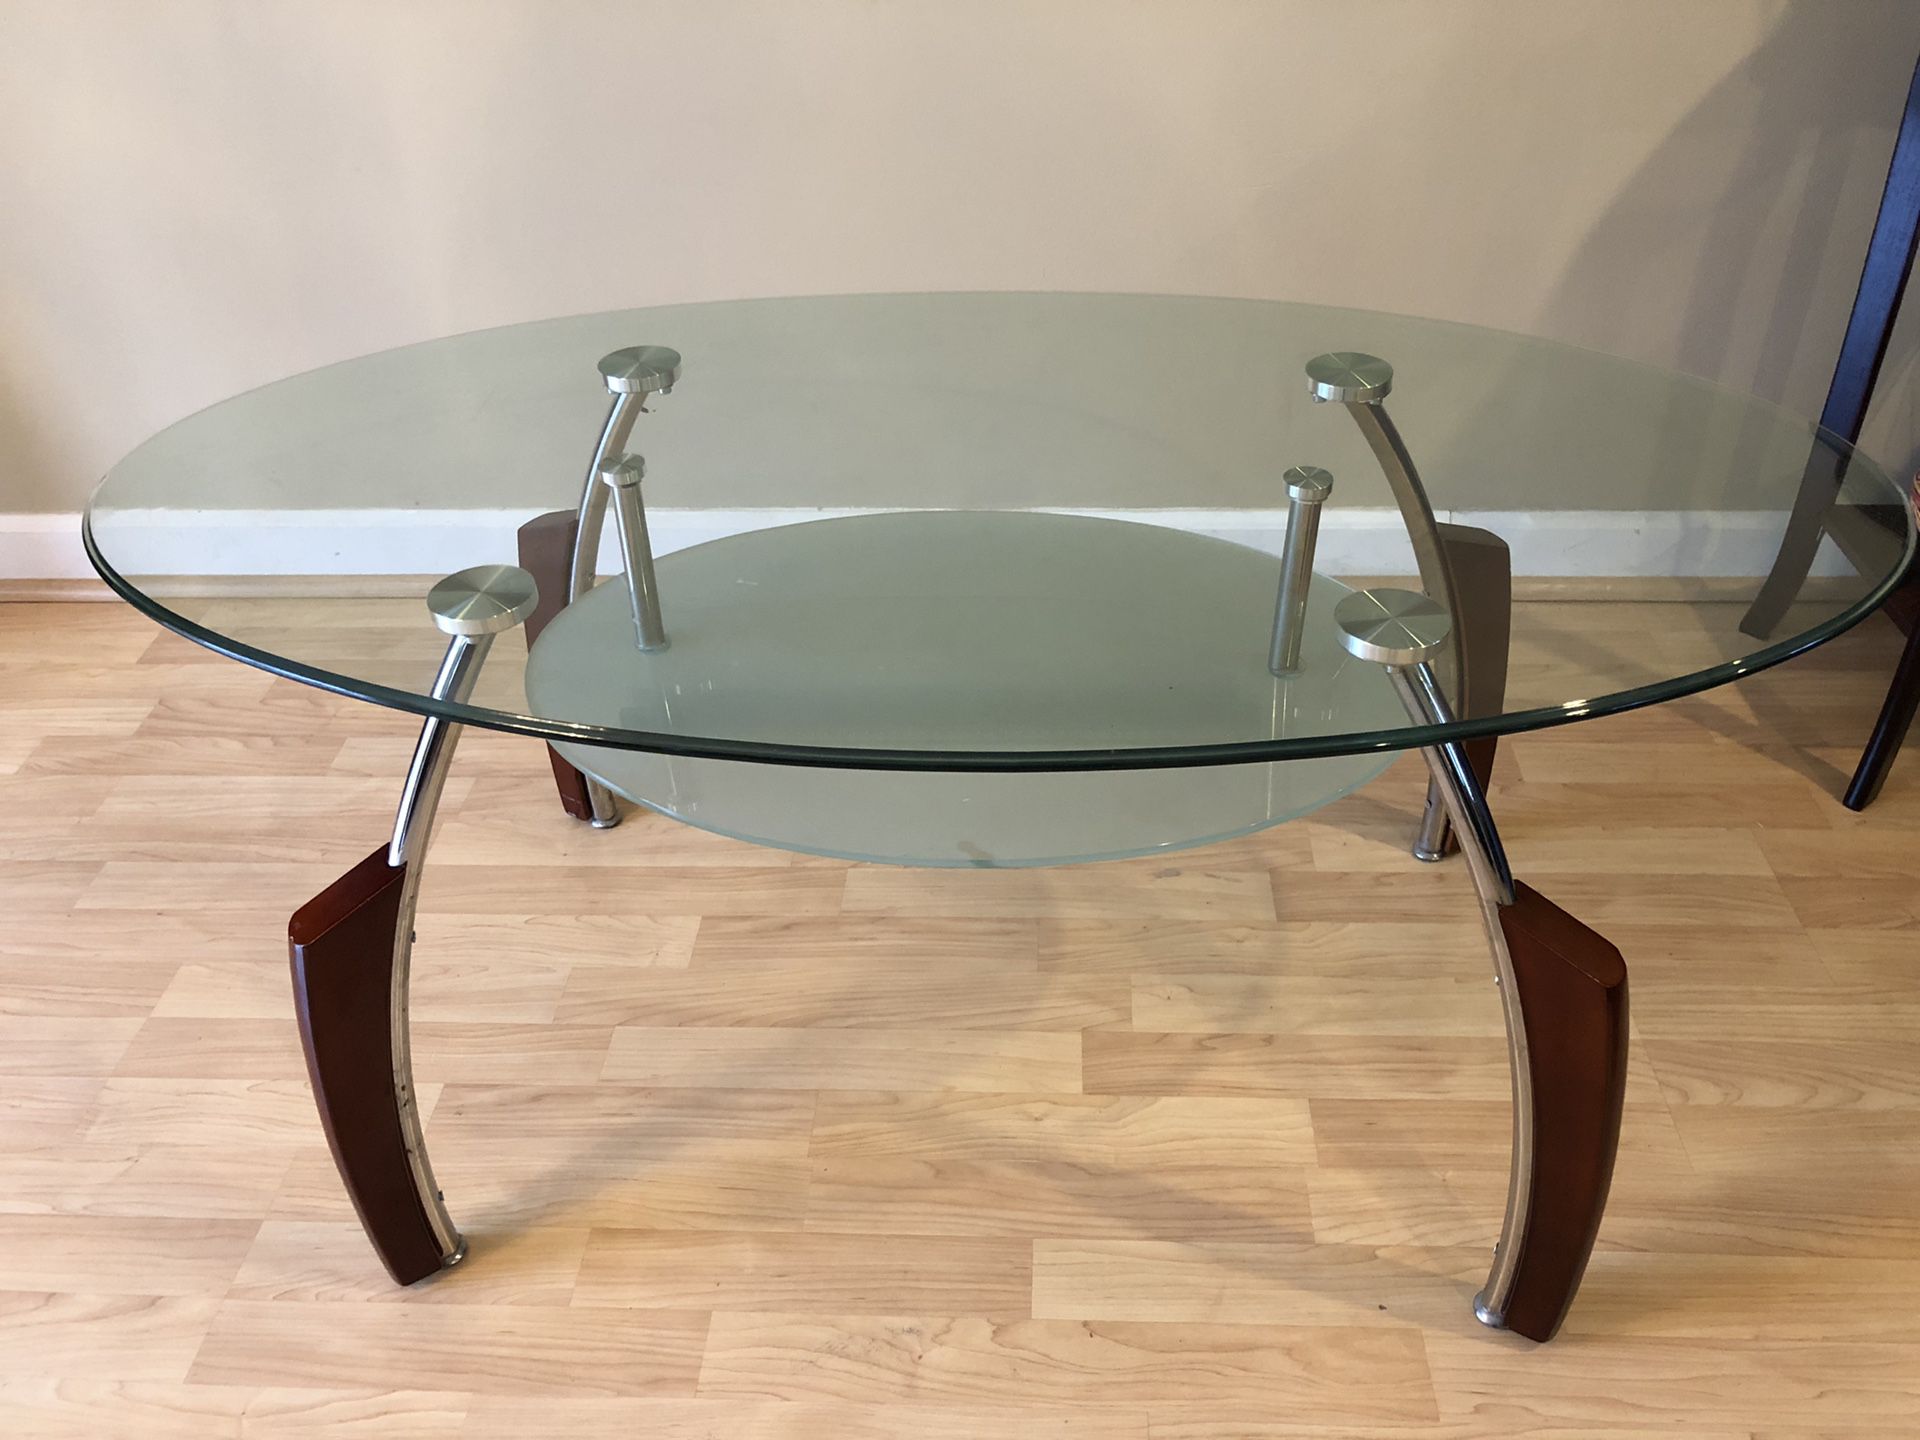 Coffe table with one end table